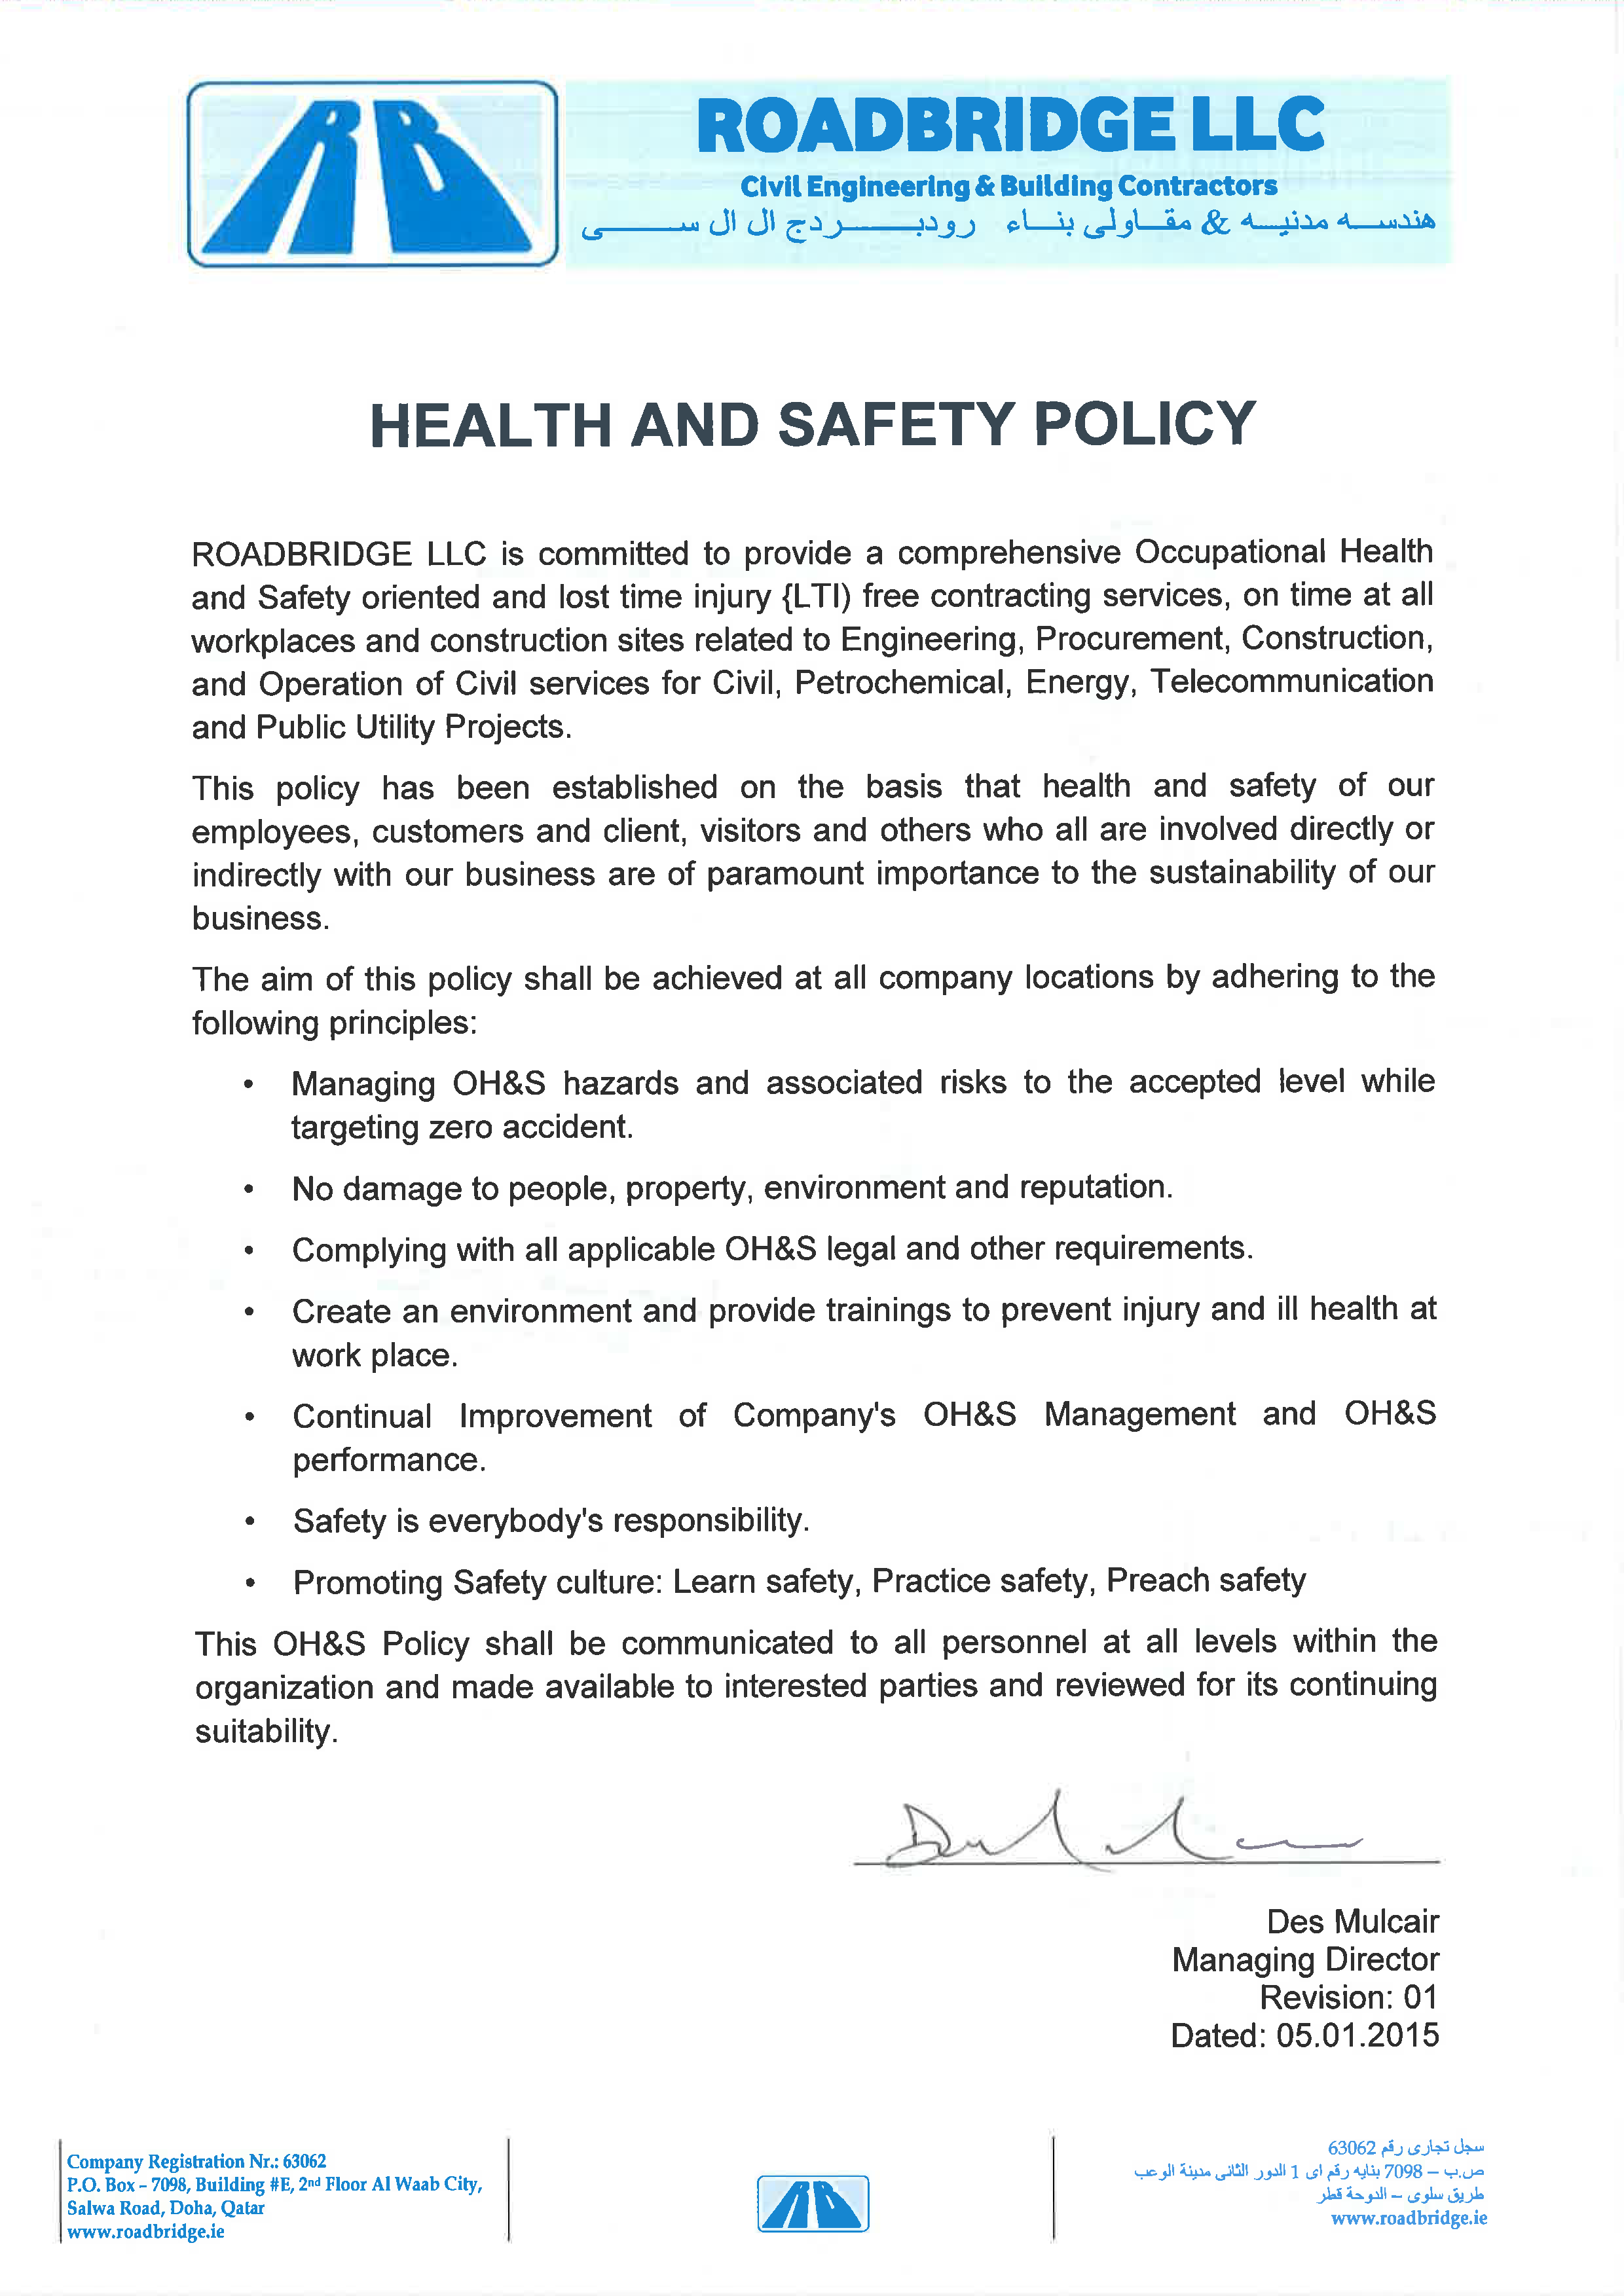 Health and safety policy